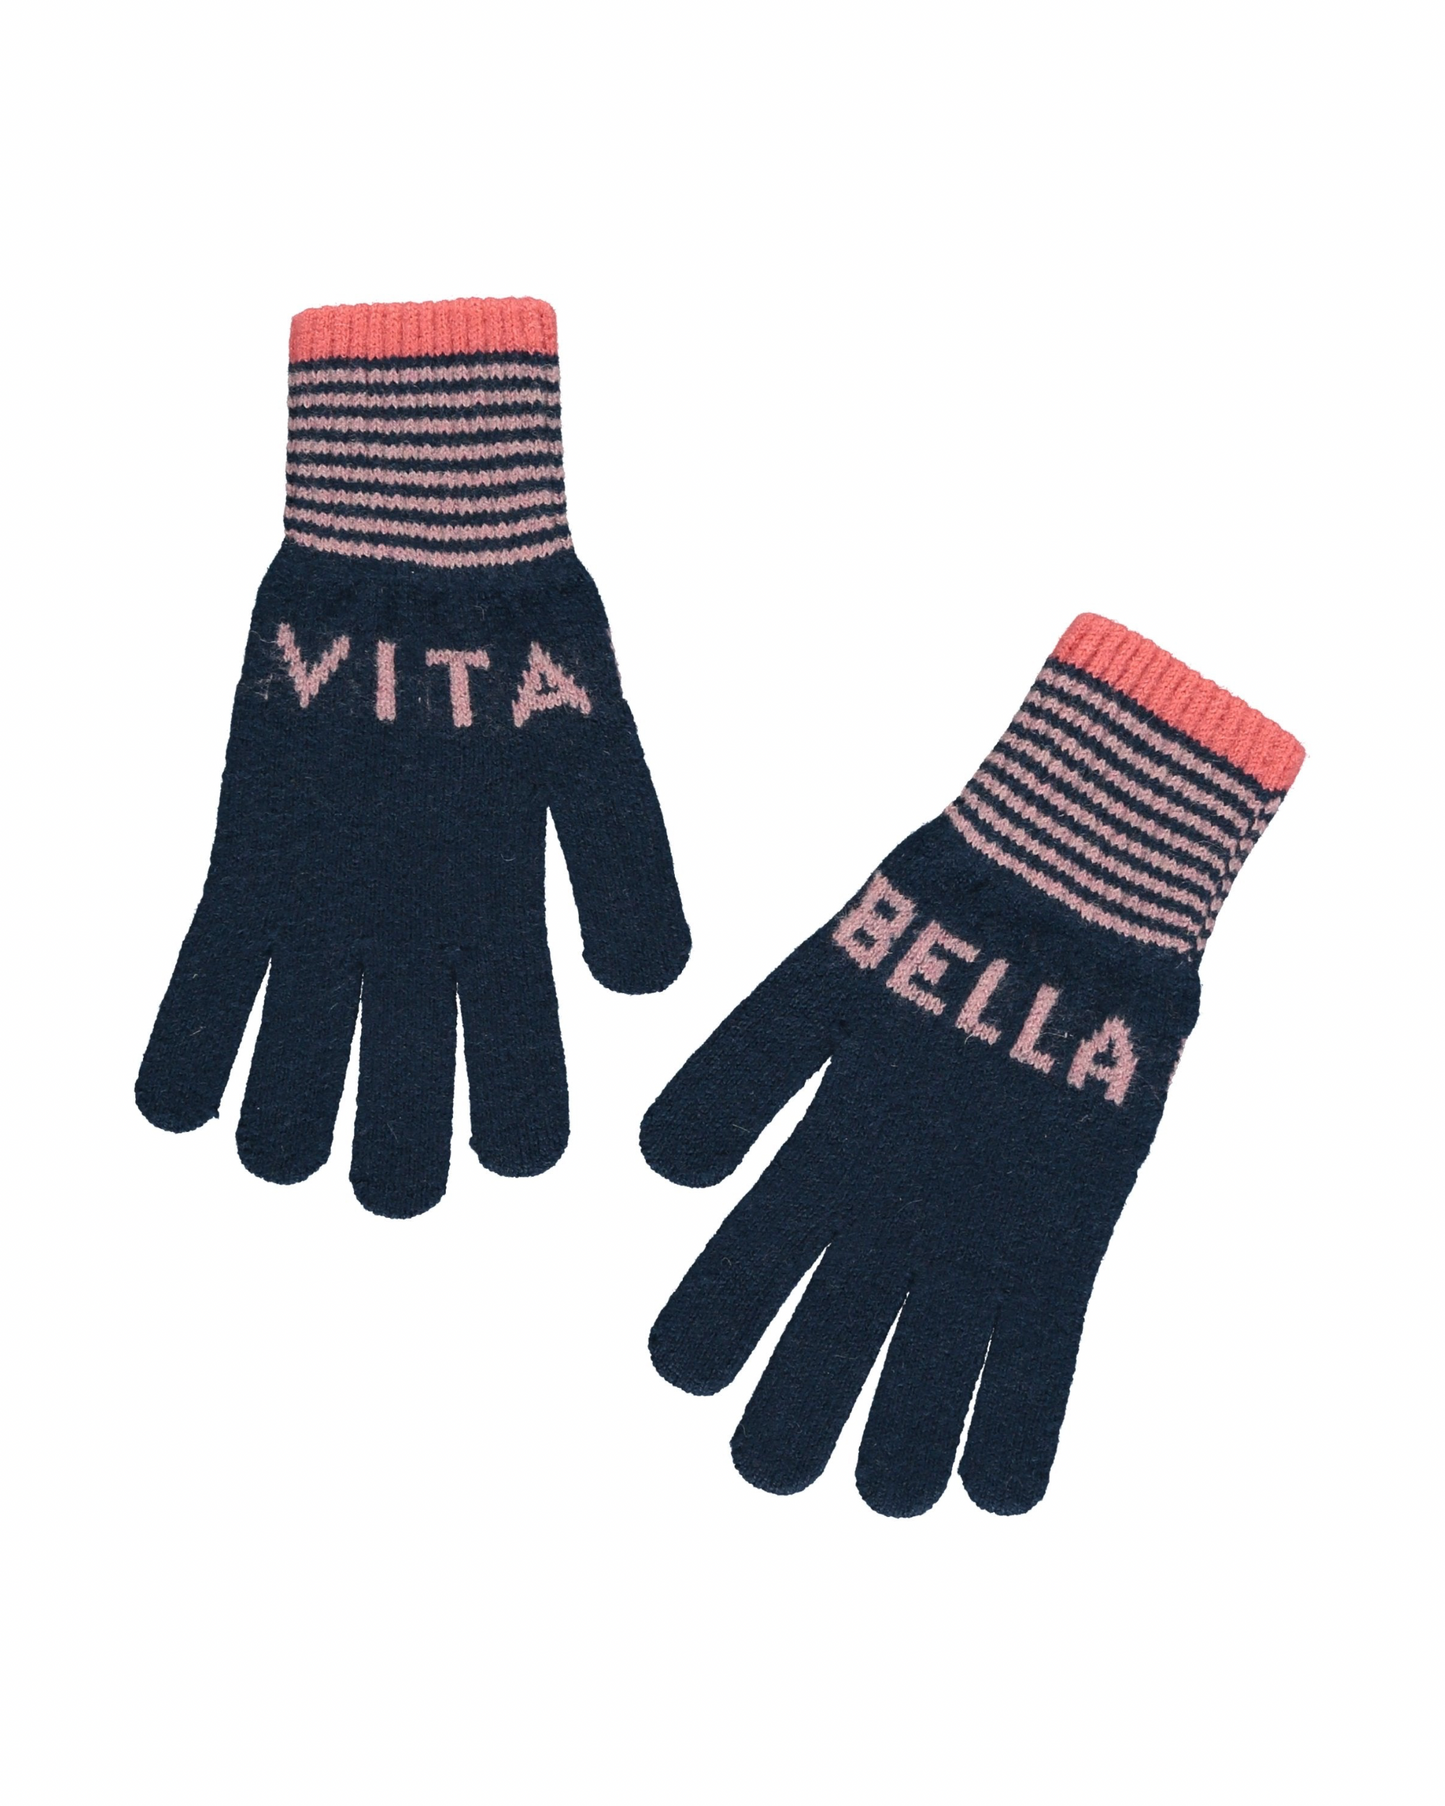 Vita Bella Gloves in Teal and Dusty Pink